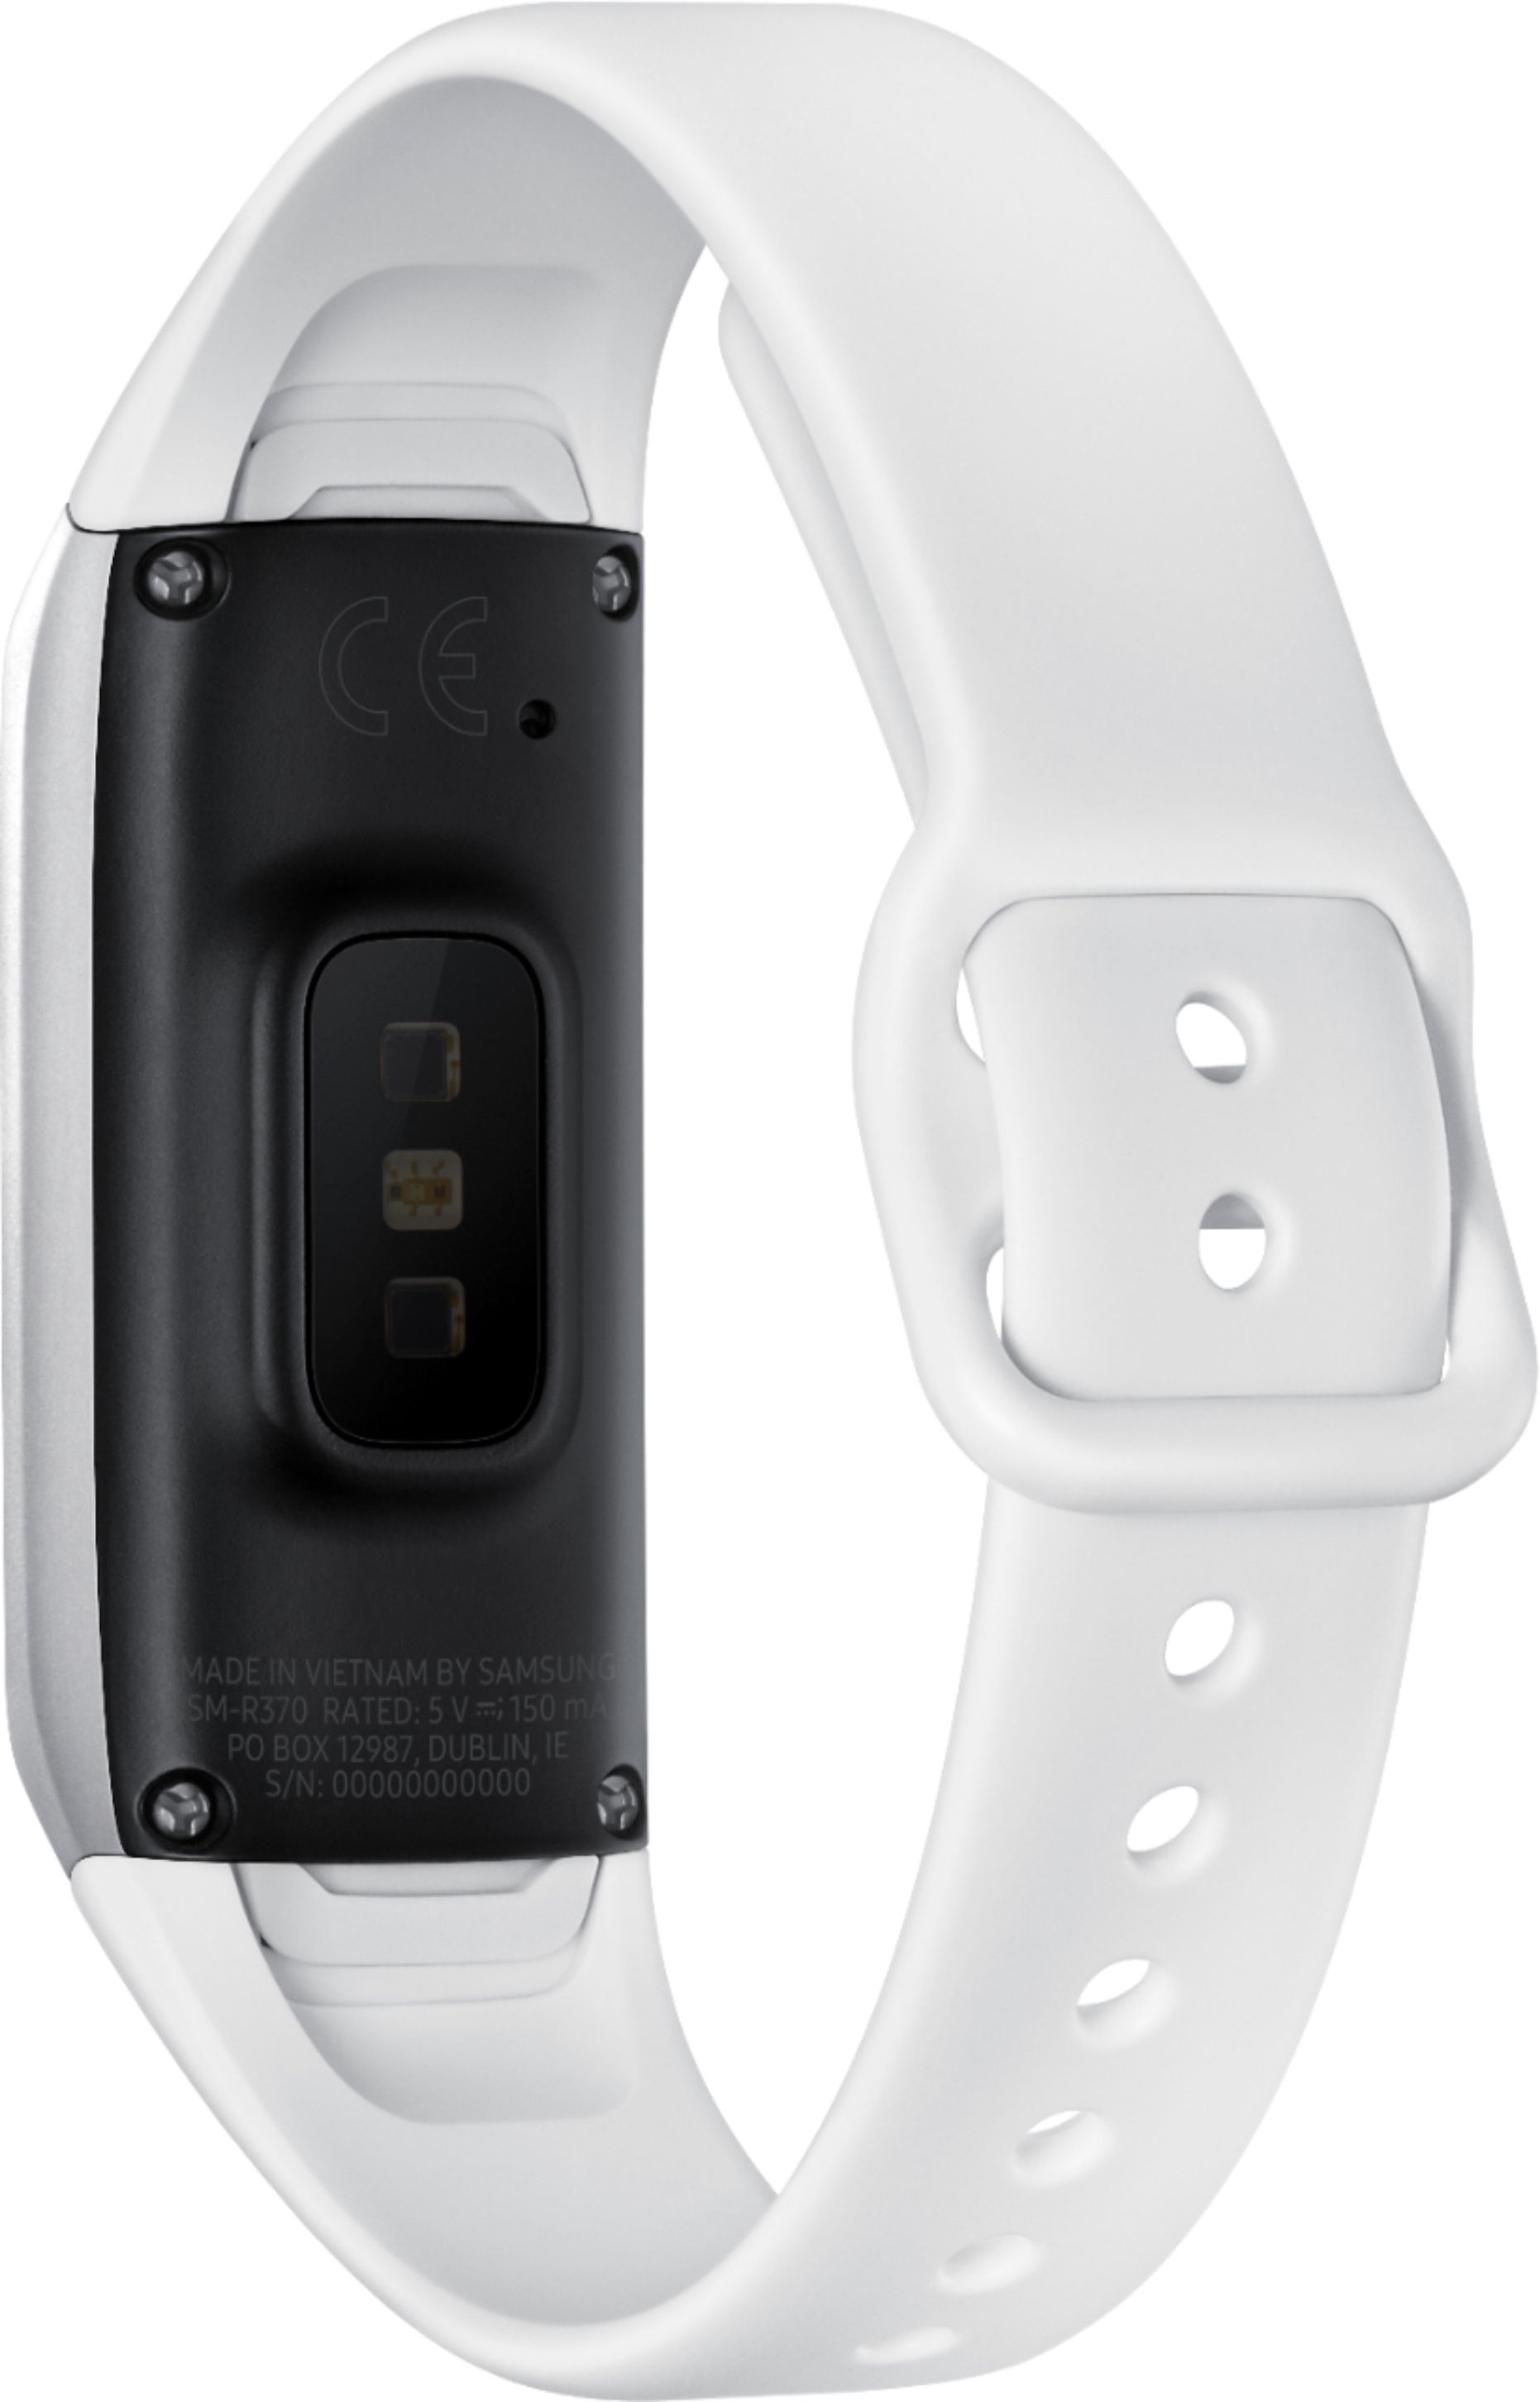 Back View: Ernest Sports - ES14 Pro White -Mobile Golf Launch monitor